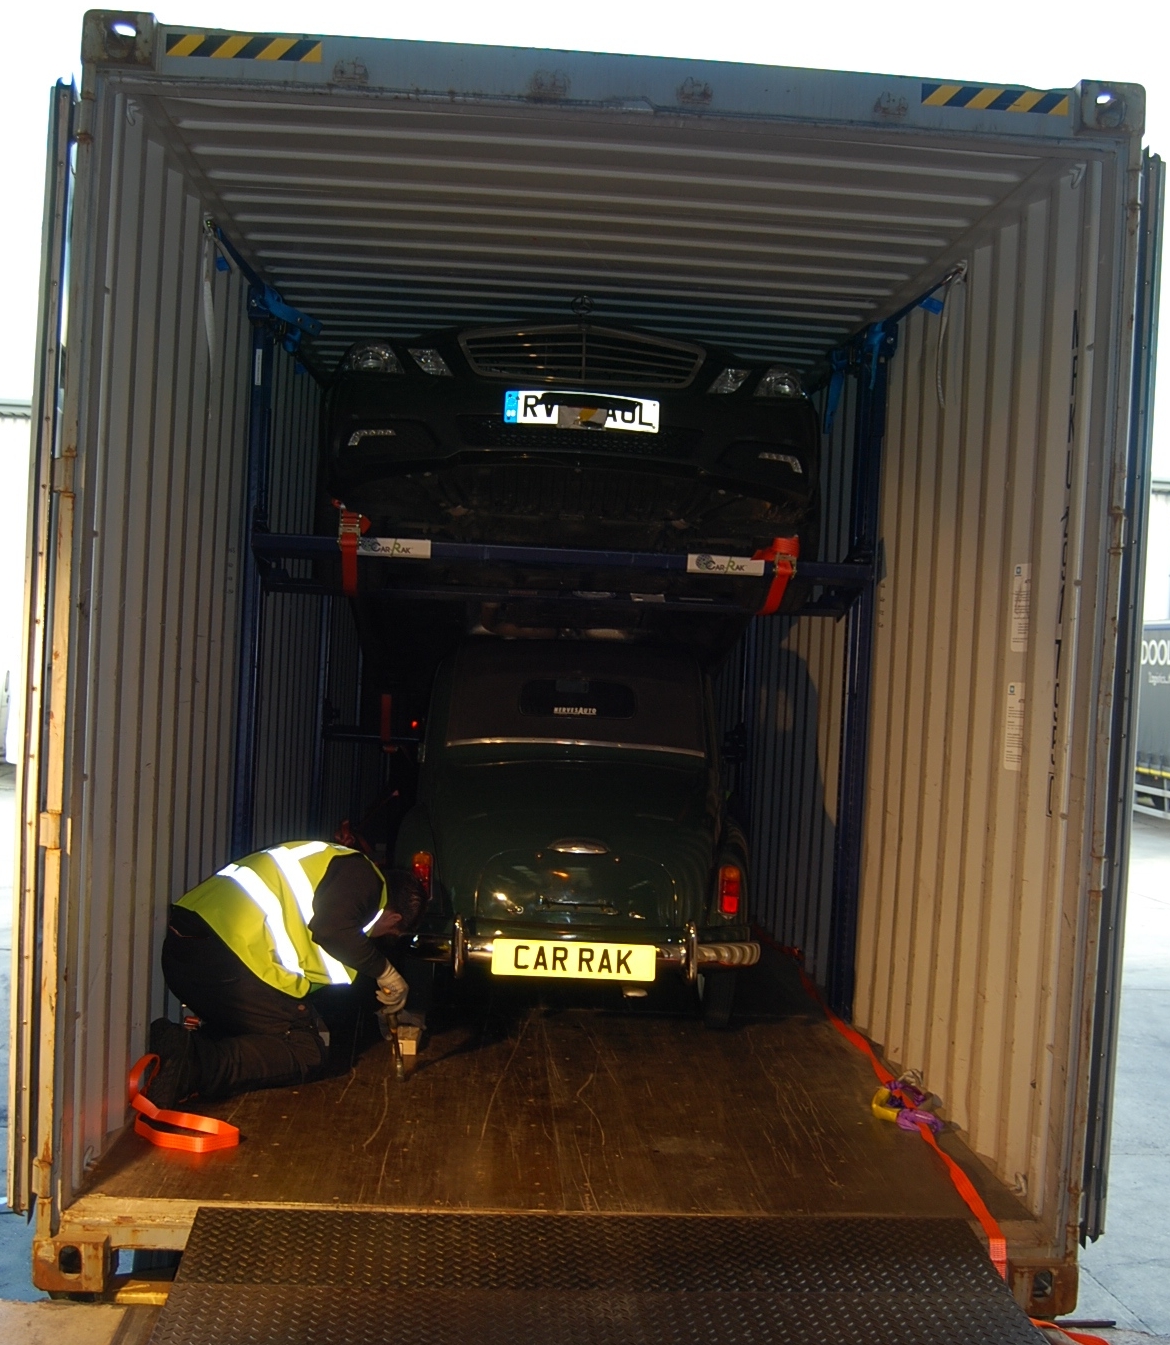 car shipping, step by step guide, 2 cars in 1 container, ccs, c.c.s.